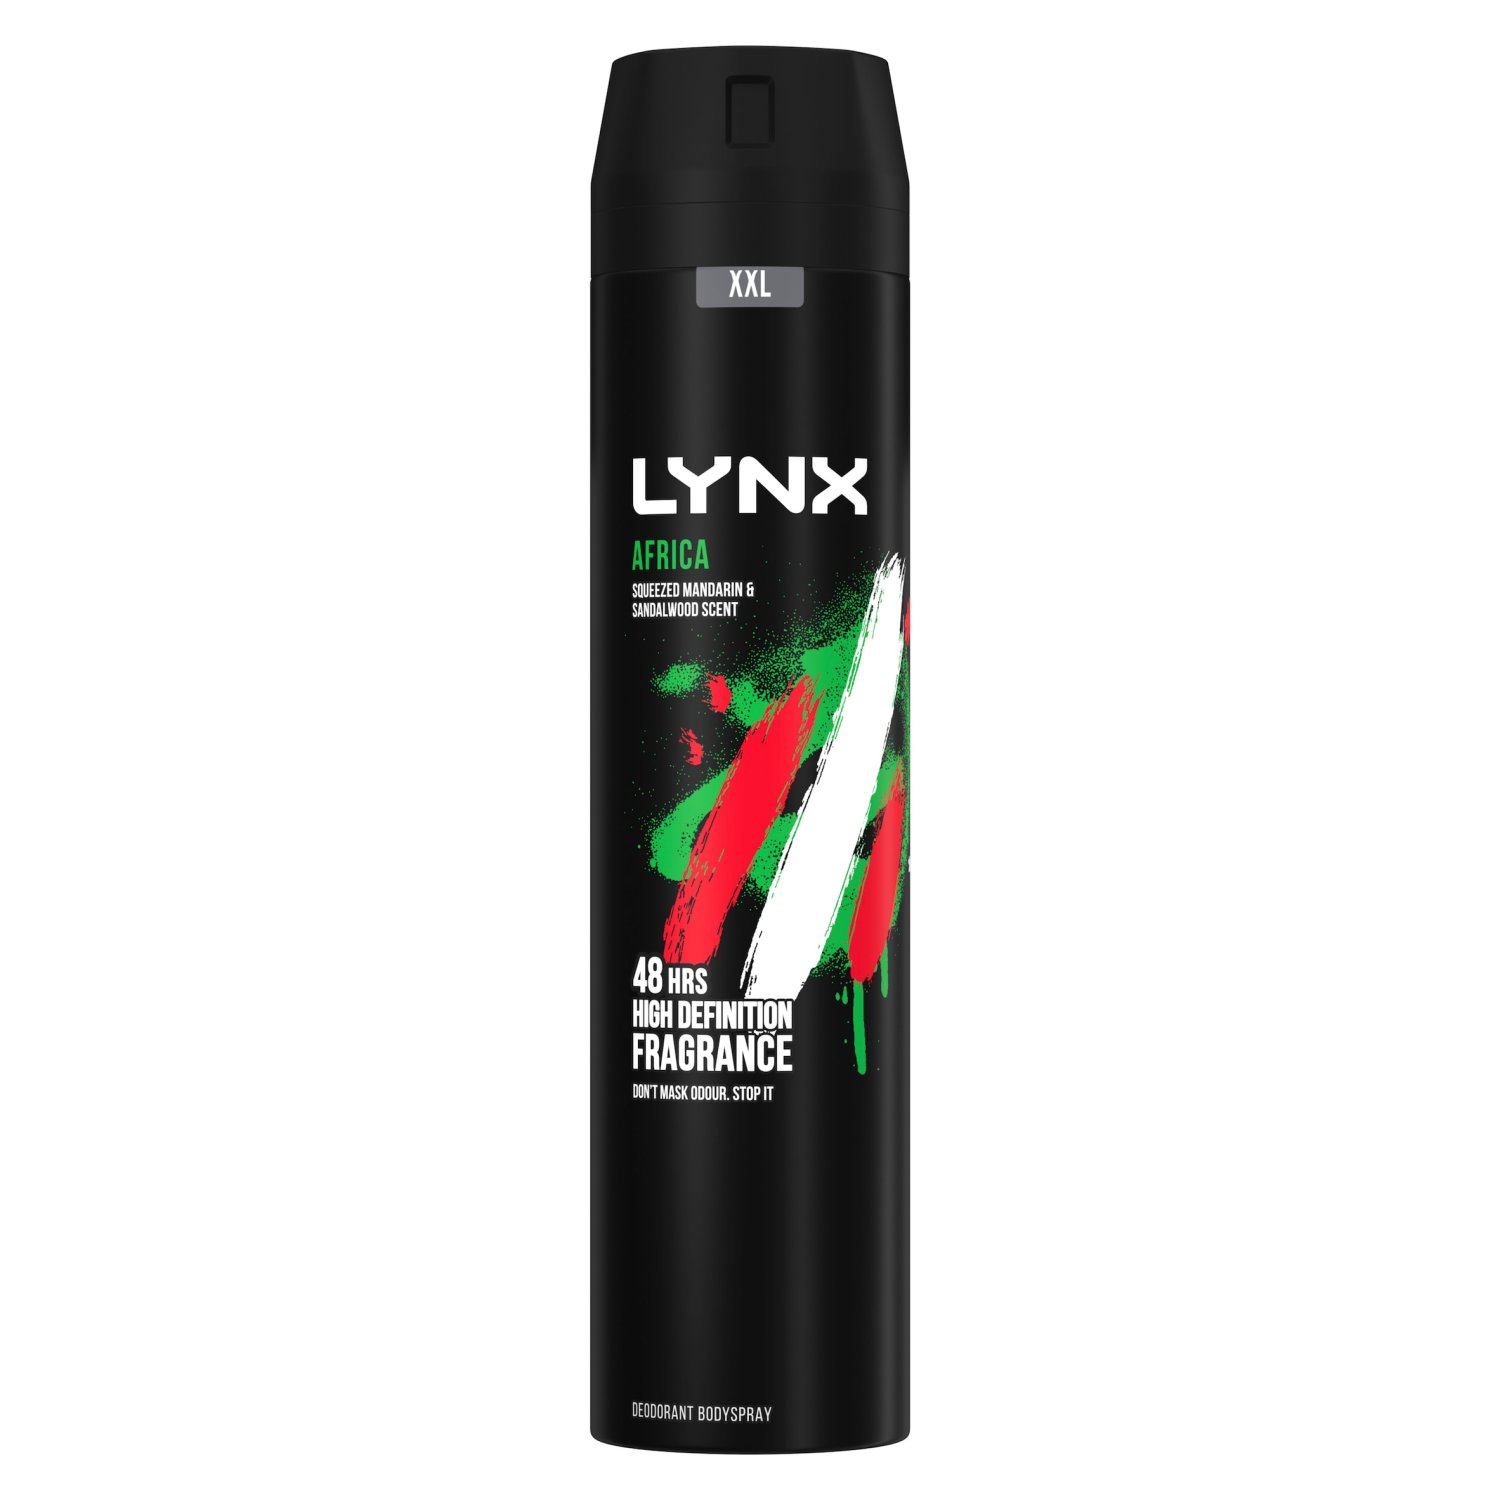 You are holding true greatness. LYNX's Africa is the UK's #1 fragrance* – you don't want to be the one missing out! We've sold +400 million LYNX Africa Bad Boys and then some. That is one for every person in the UK & Ireland five times over. With our Africa Bodyspray, you get 48 hours of Lynx's high-definition, G.O.A.T. squeezed mandarin and sandalwood fragrance combo. LYNX Africa Bodyspray gives you 48 hours of odour protection with our revolutionary dual-action odour-busting zinc technology, keeping you smelling awesome and feeling chill, all day. You never know when opportunity will strike, so you need a bodyspray that’s going to keep you smelling iconic and feeling confident no matter the circumstances. How to use it? Shaking the can well and holding it 15 cm away from your body, spray across your chest in a well-ventilated area for G.O.A.T. level fragrance. Avoid contact with eyes and broken skin. G.O.A.T. LYNX bodyspray deodorant comes in an infinitely recyclable aerosol can – fresher you, cleaner planet. By 2025, LYNX aims for all our packaging to be recyclable or to include recycled materials. Welcome to the future. It smells amazing. LYNX.
*Kantar Usage, GB Male Deodorant % Weekly Occasions. June 2018–2022.